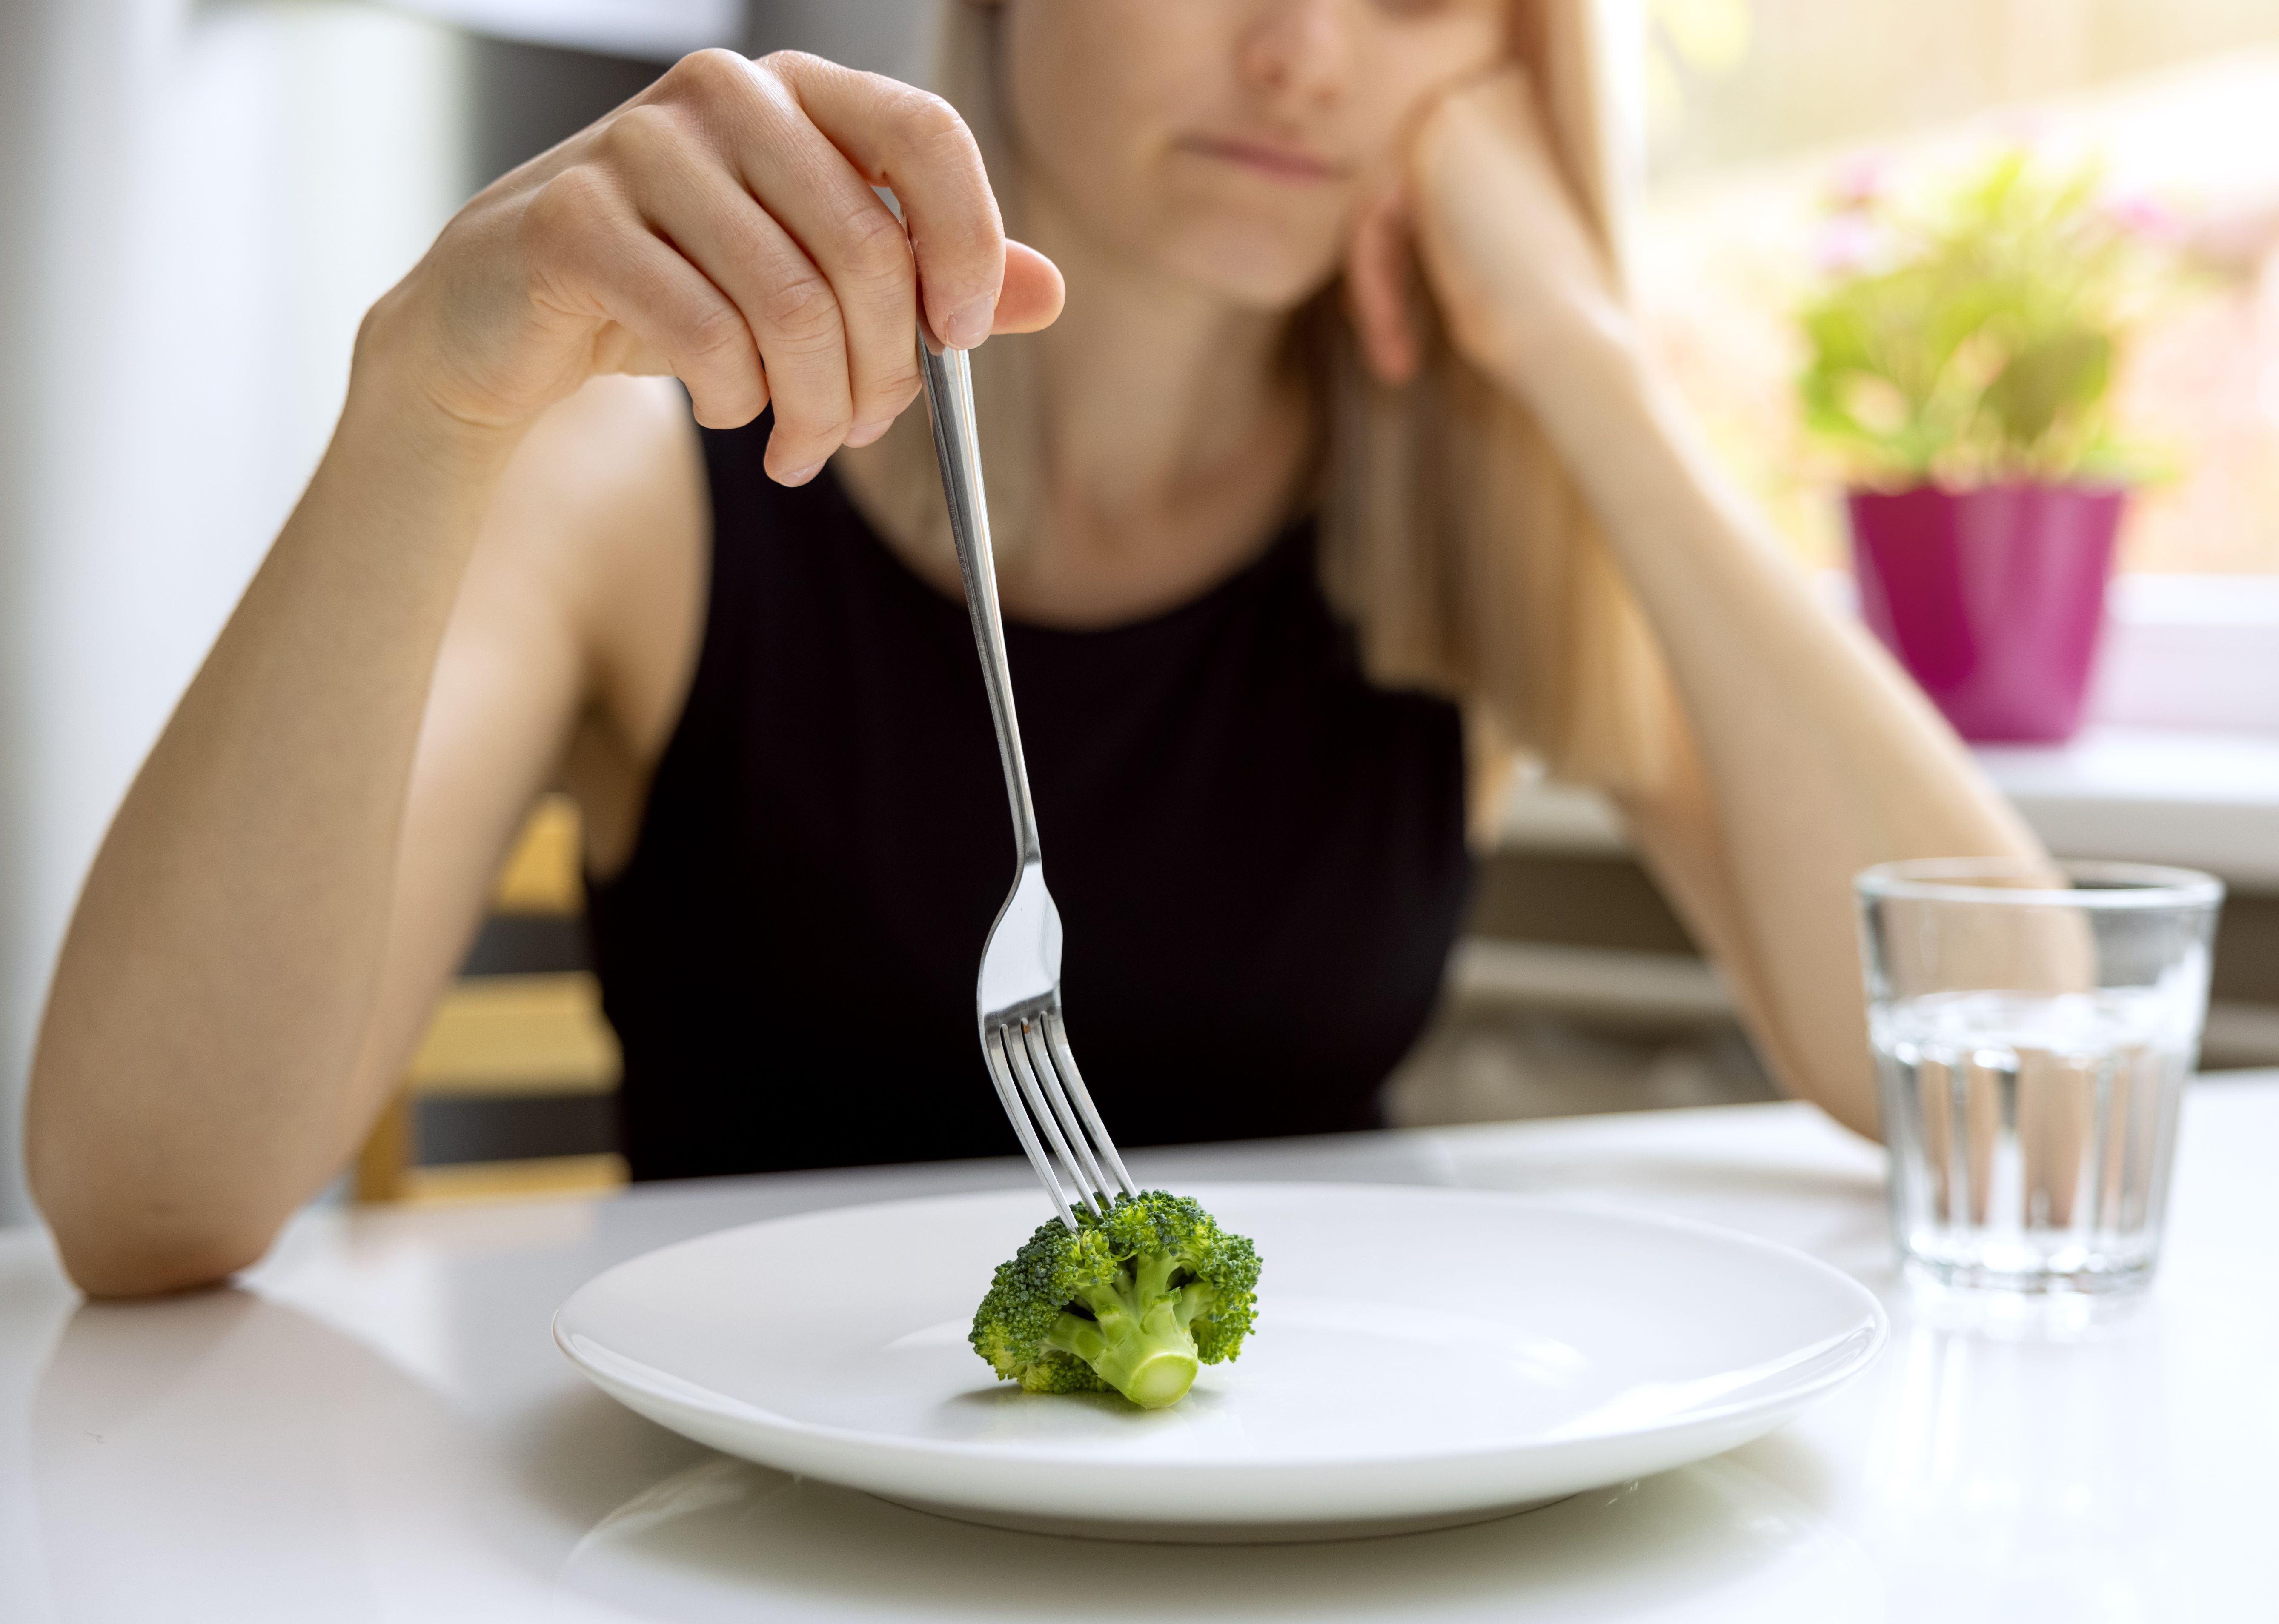 Unhappy woman looking at a small broccoli portion on the plate